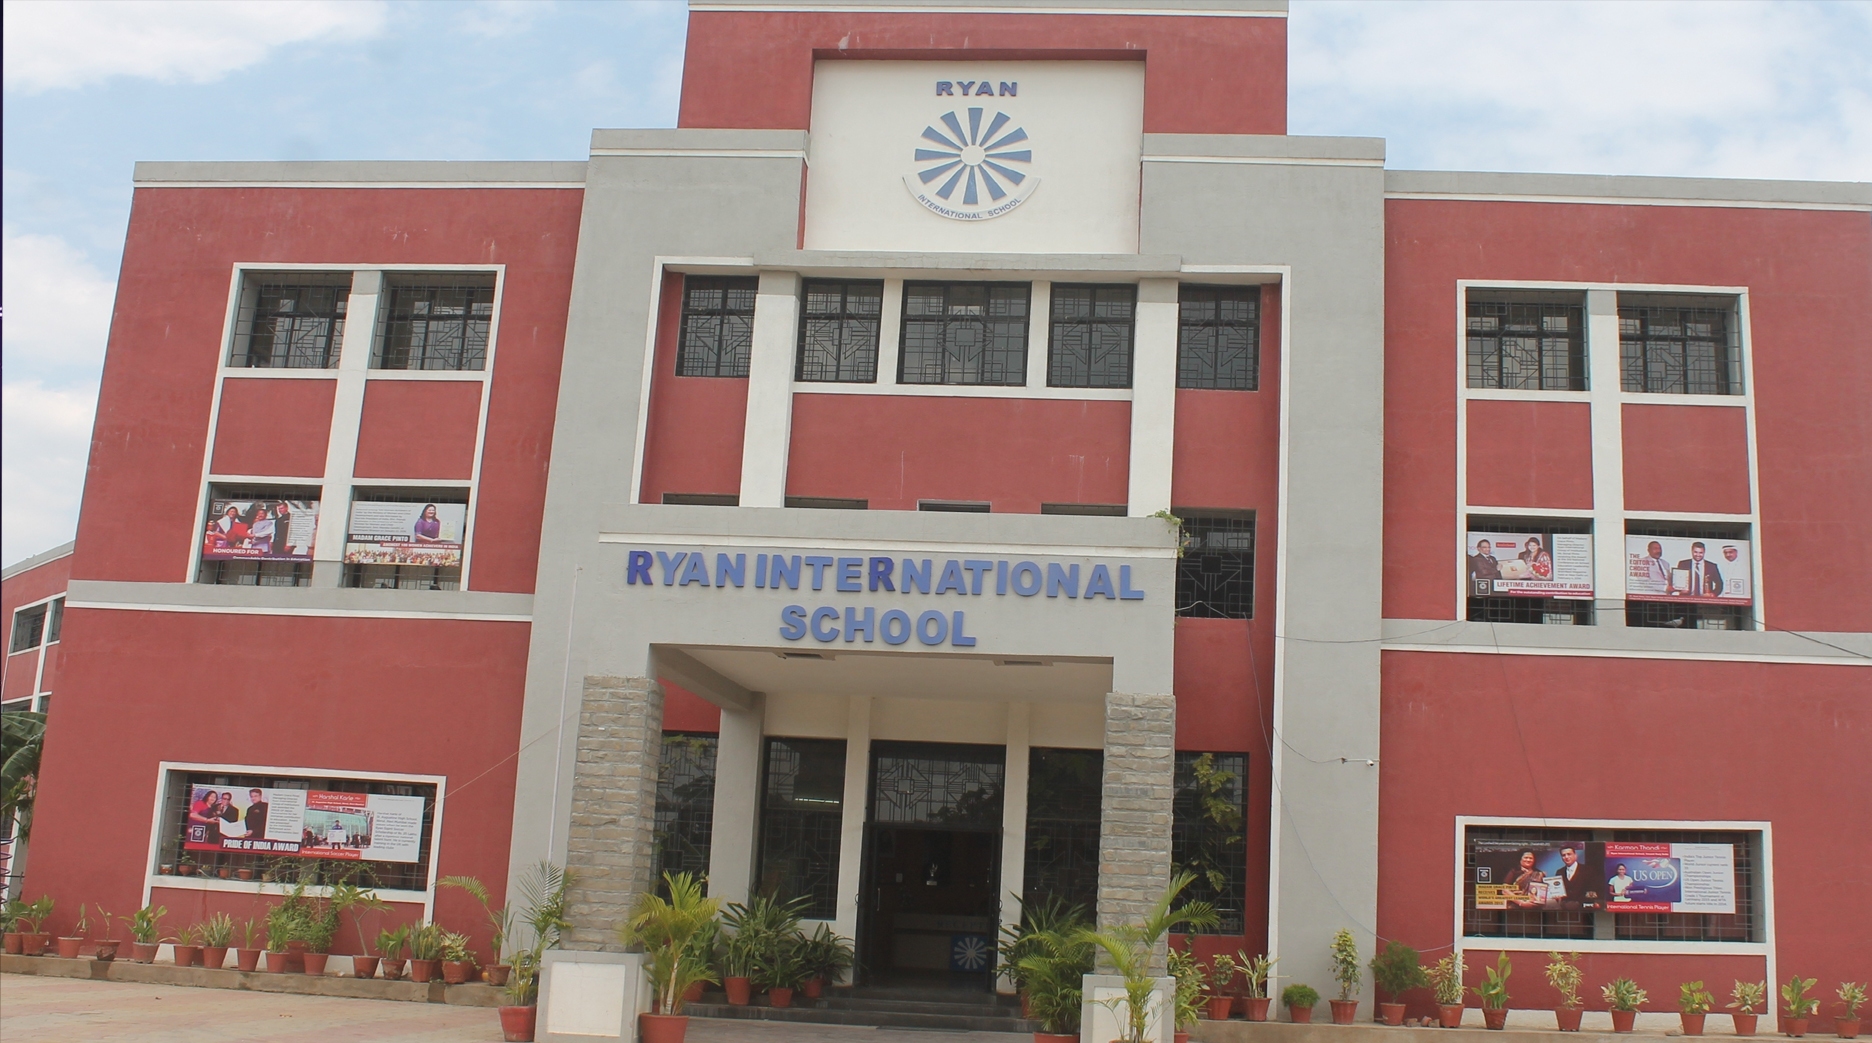 The highest academic standards with a challenging environment - Ryan international School, Udaipur